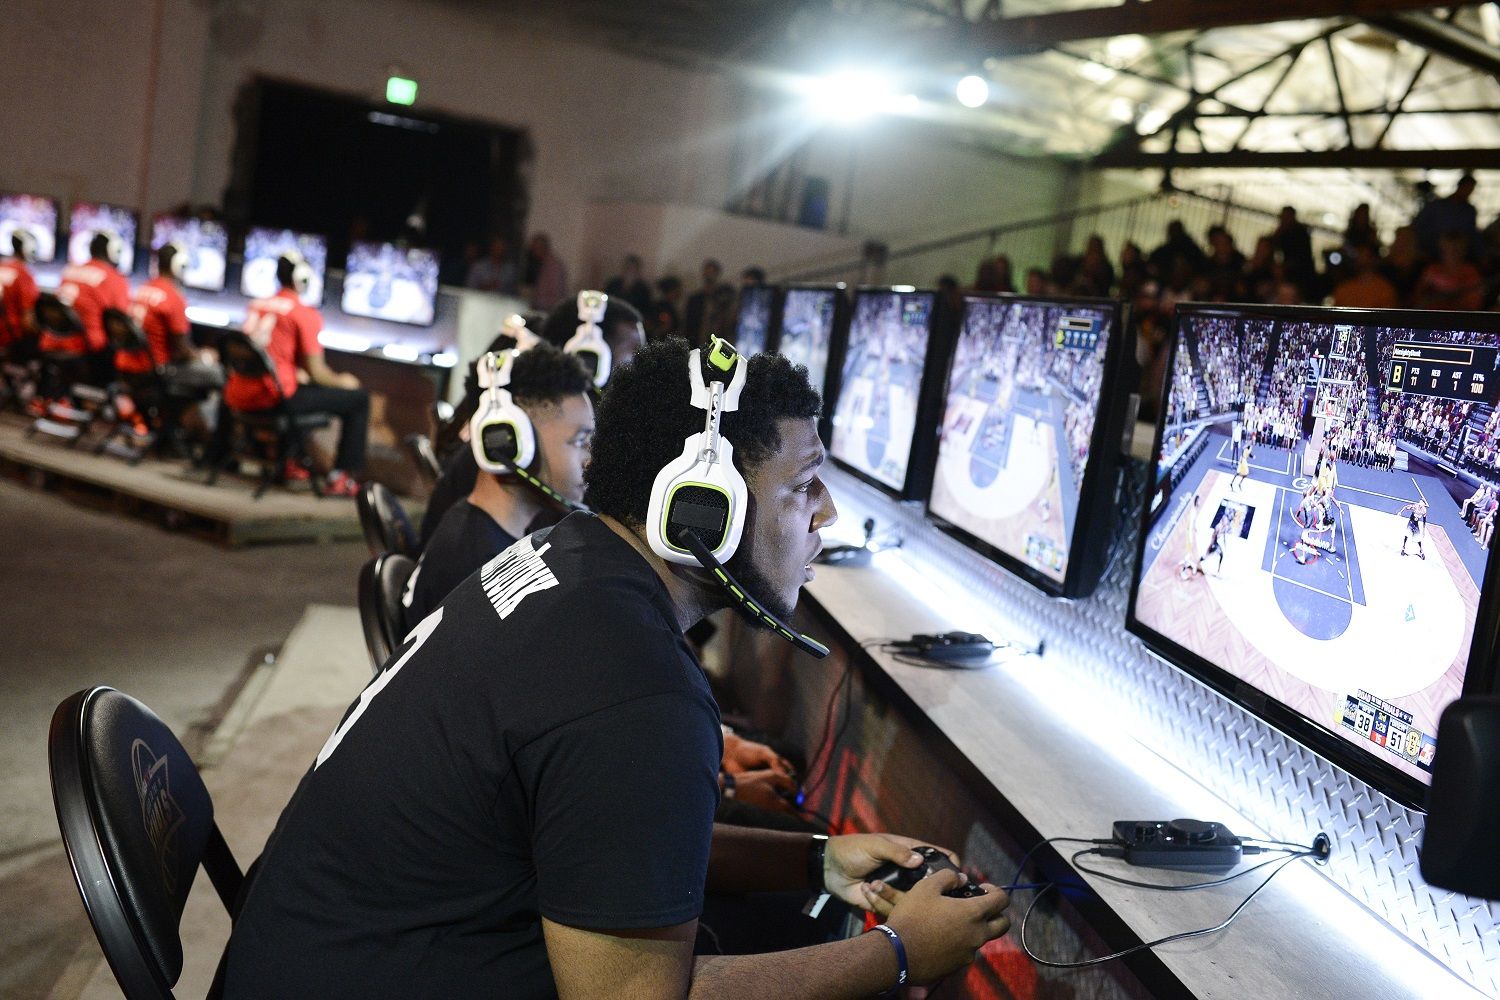 IMAGE DISTRIBUTED FOR NBA 2K - Team Drewkerbockers seen at the NBA 2K16 Road to the Finals championship event on Wednesday, June 1, 2016, in Los Angeles. Two teams of gamers go head to head during a competition that merges simulation basketball with eSports for a shot at $250,000 and a trip to the 2015-2016 NBA Finals. (Photo by Dan Steinberg/Invision for NBA 2K/AP Images)